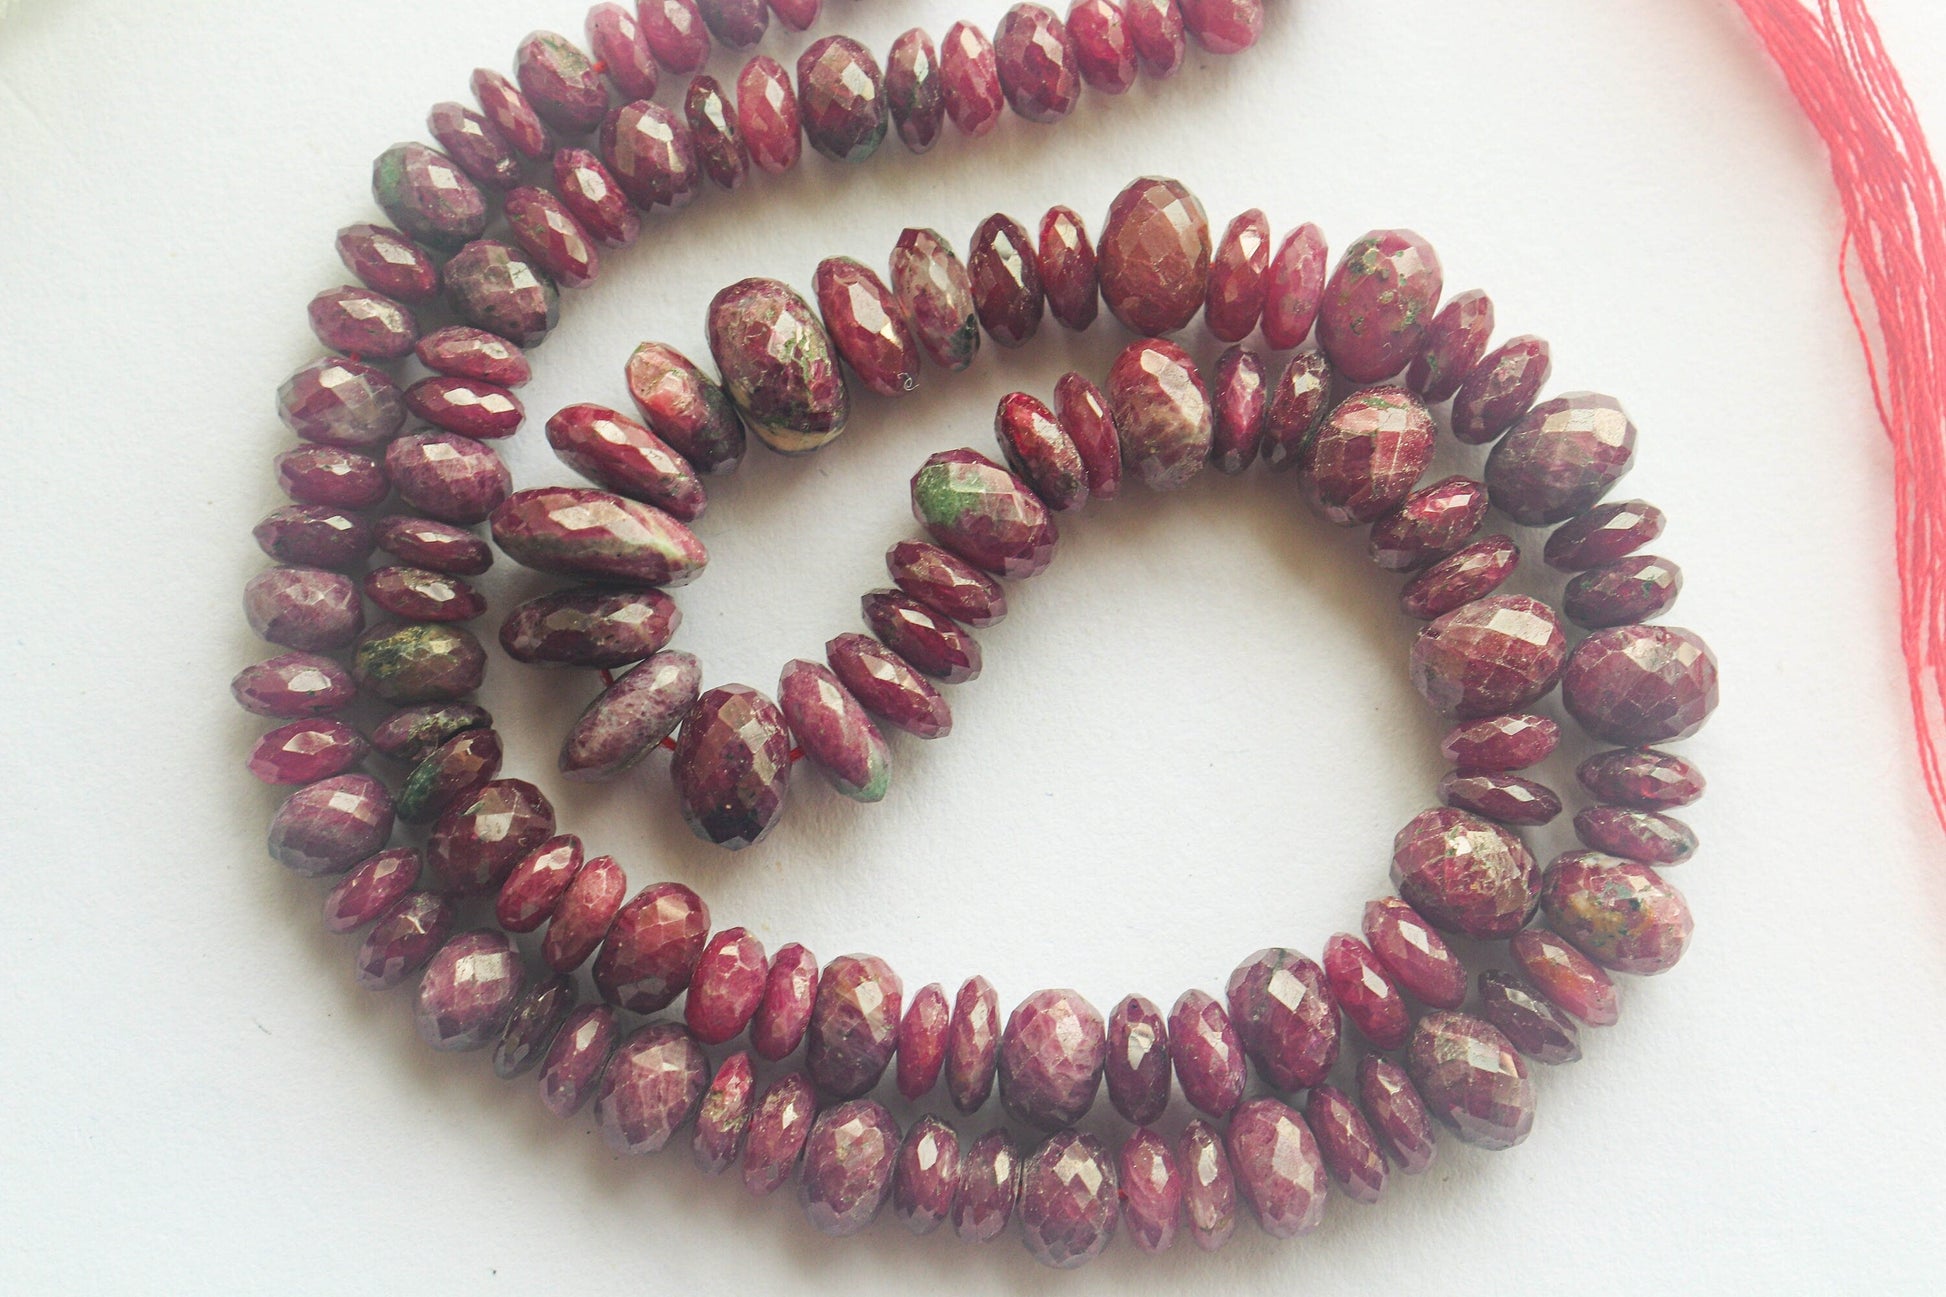 16 Inches Natural Ruby Gemstone Faceted Beads | 5mm to 10mm | Natural Ruby Beads for Jewelry making Beadsforyourjewelry